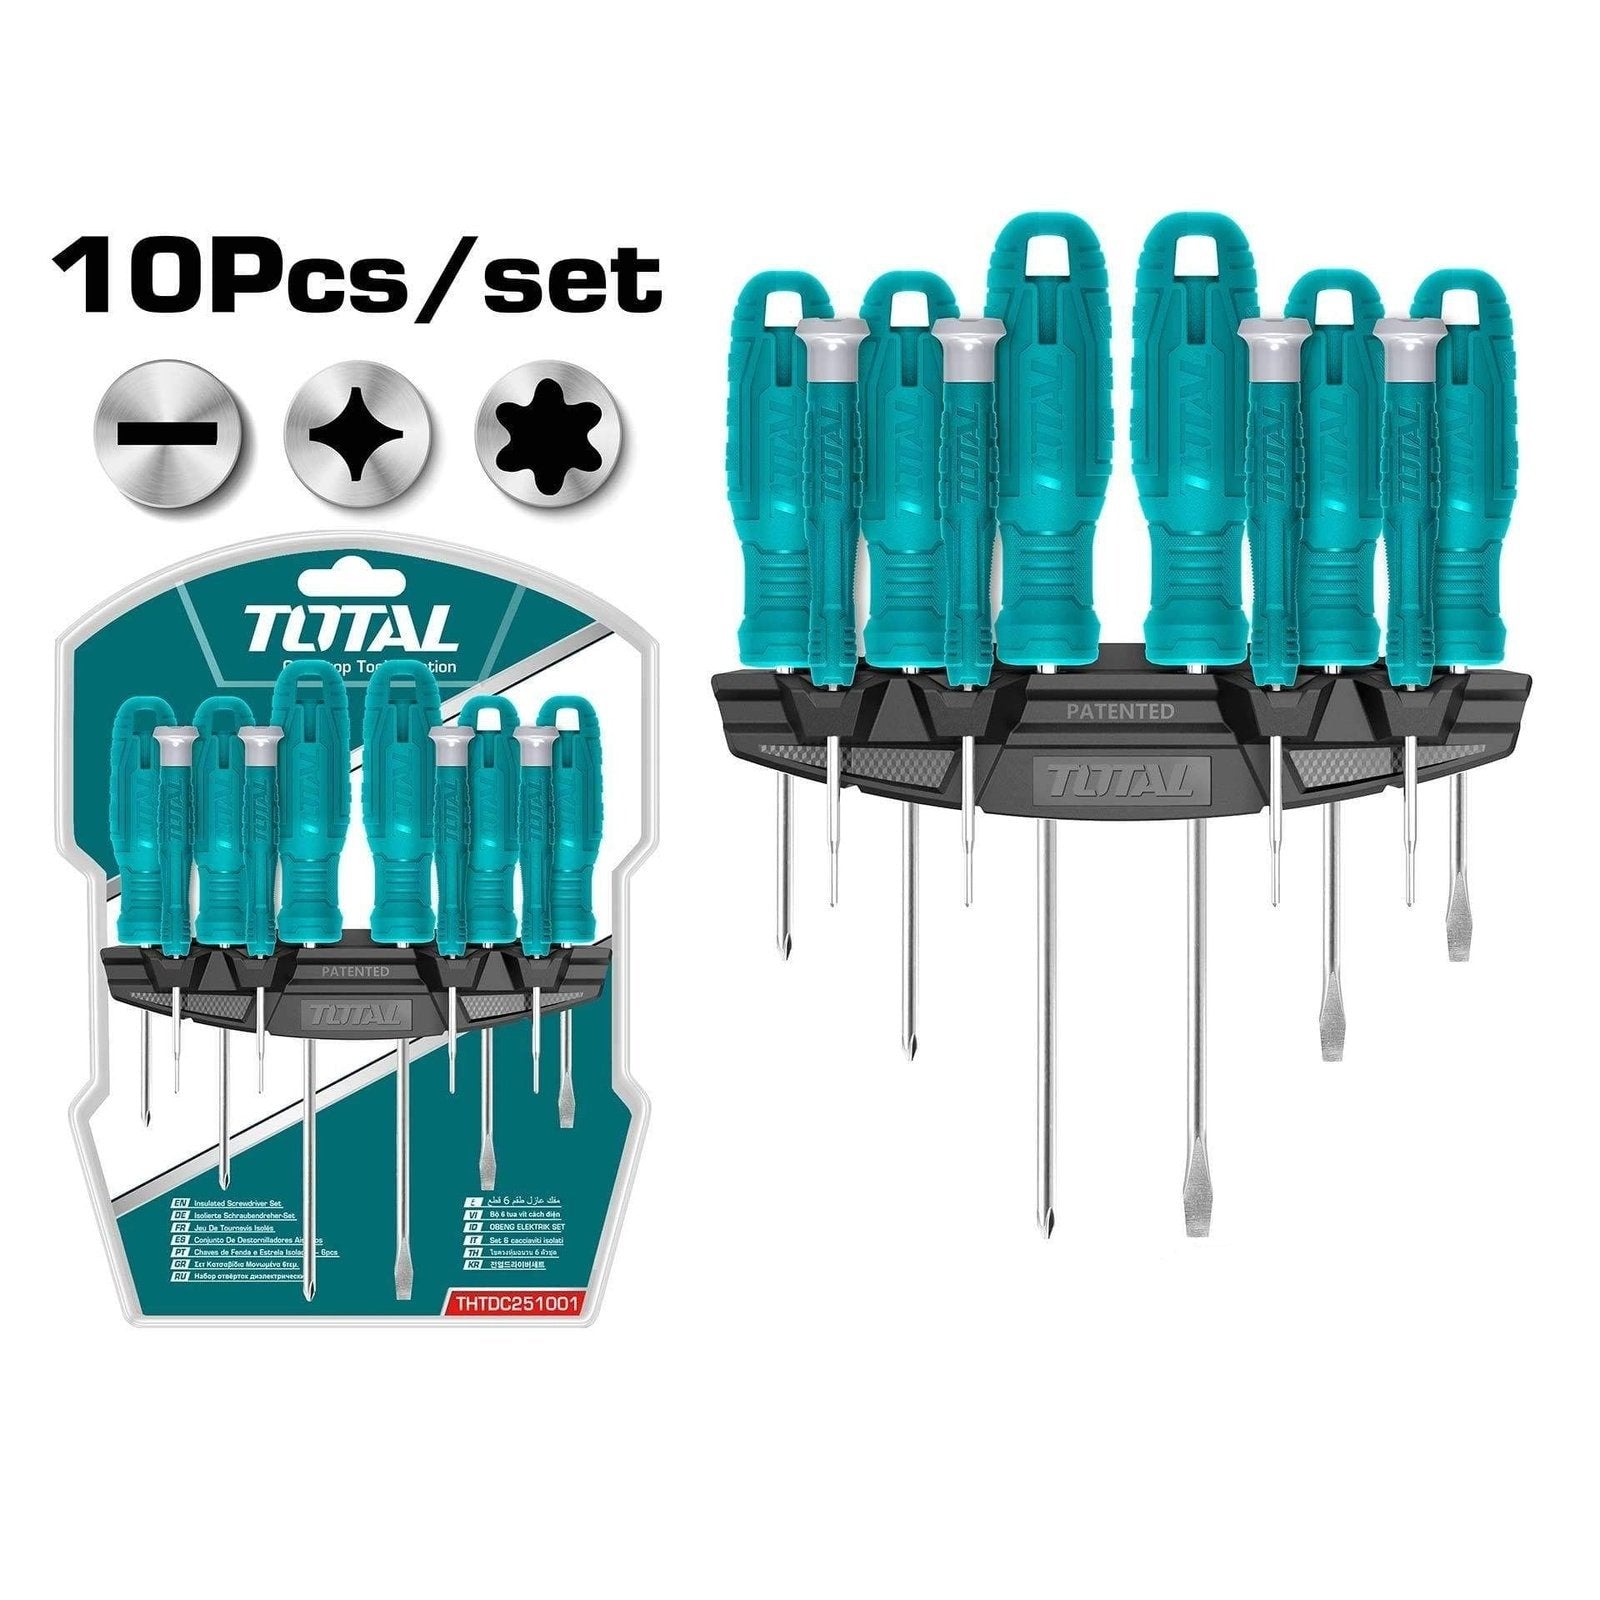 Total 10 Pcs Screwdriver & Precision Screwdriver Set - THTDC251001 | Supply Master | Accra, Ghana Tools Building Steel Engineering Hardware tool